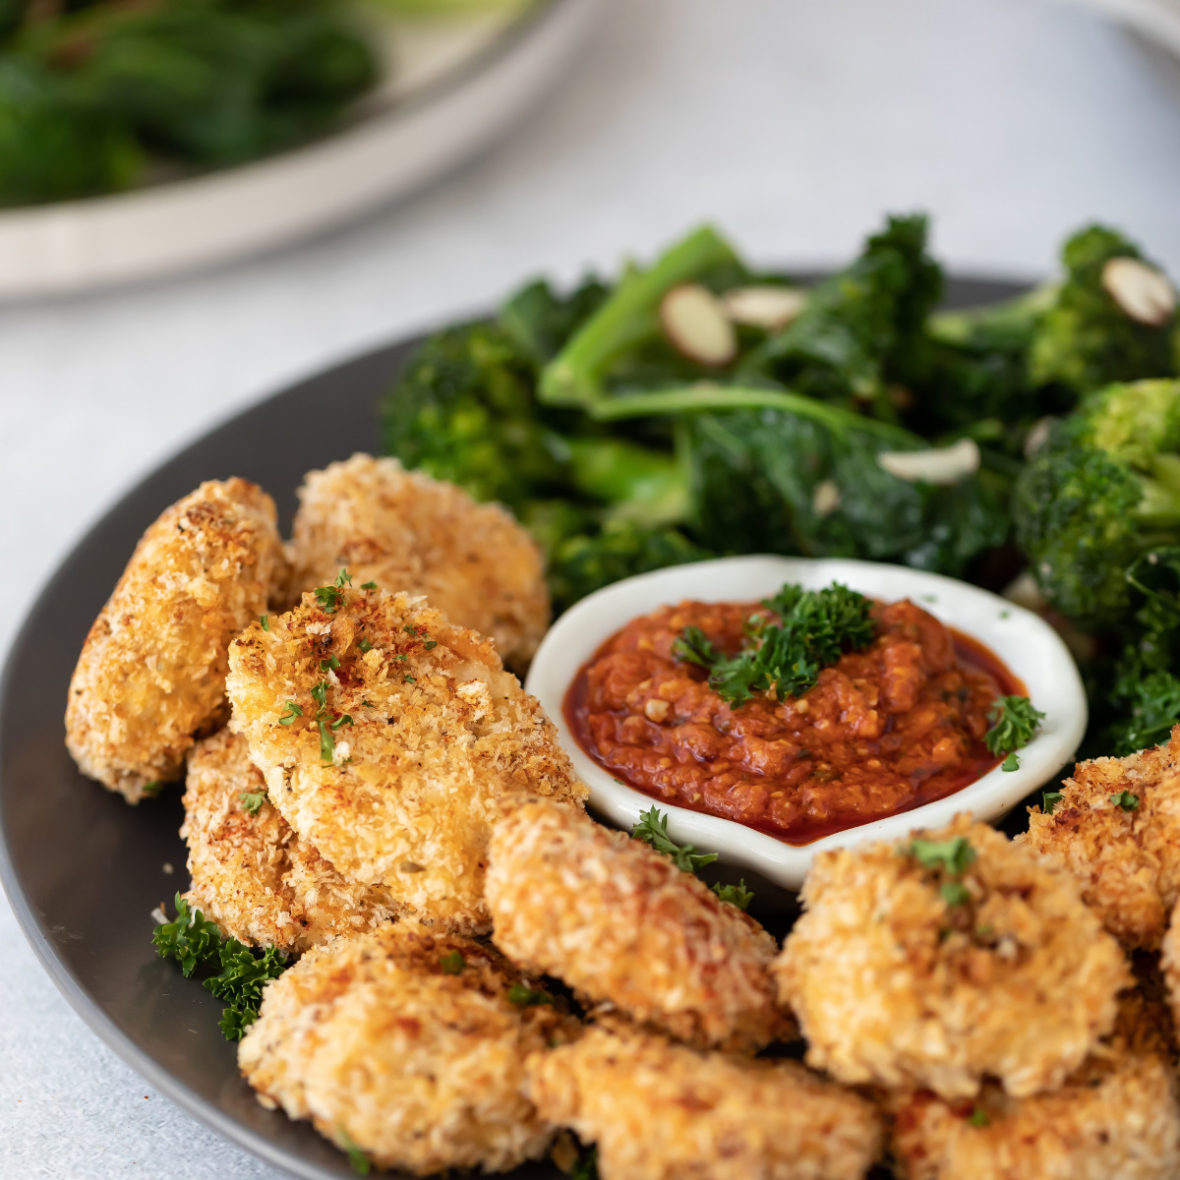 Chicken Nuggets with Wintery Sides - Waitoa free range chicken